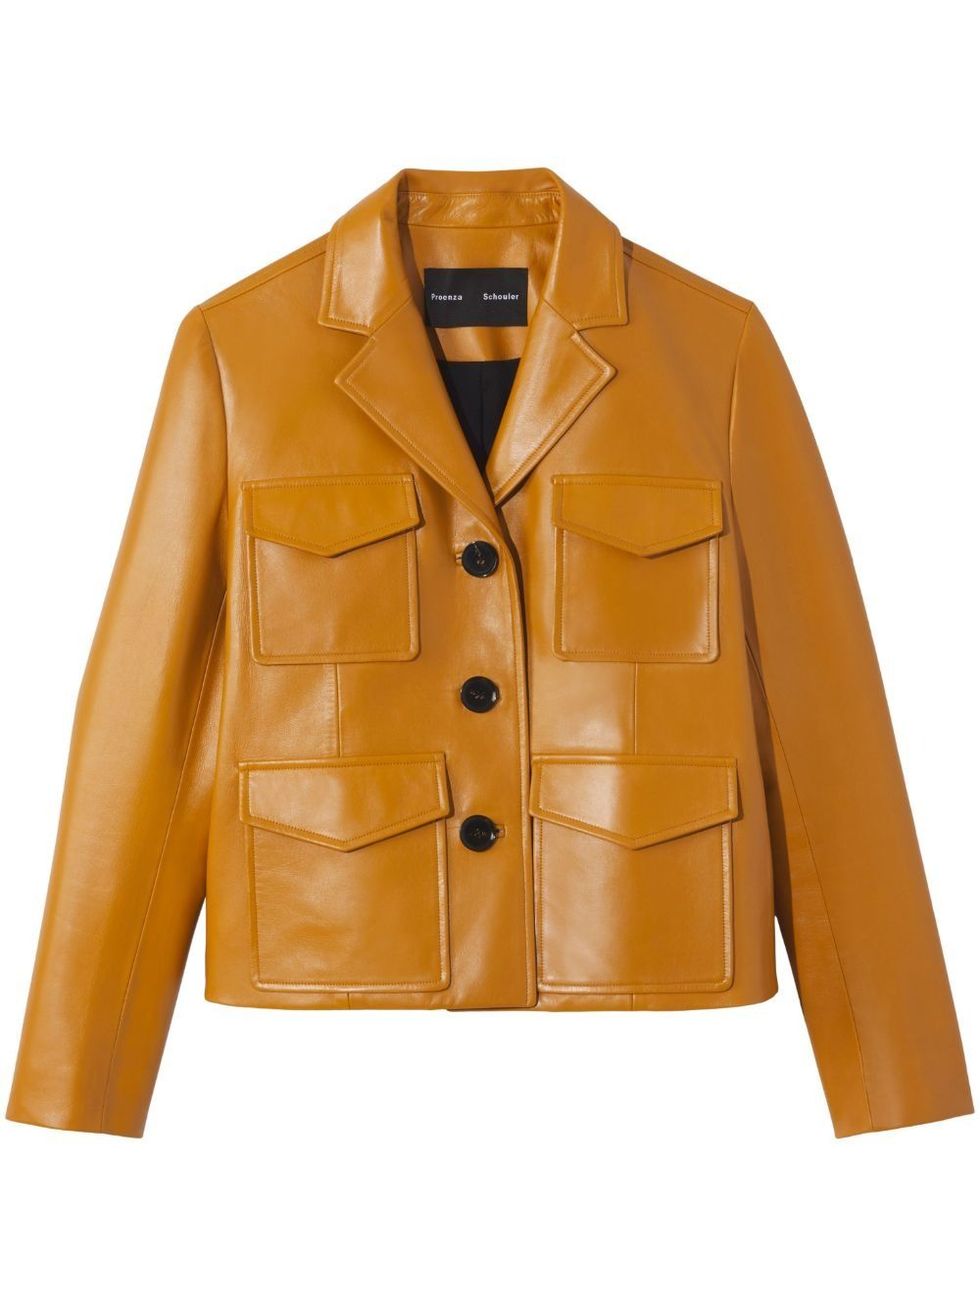 Proenza Schouler single-breasted Leather Jacket